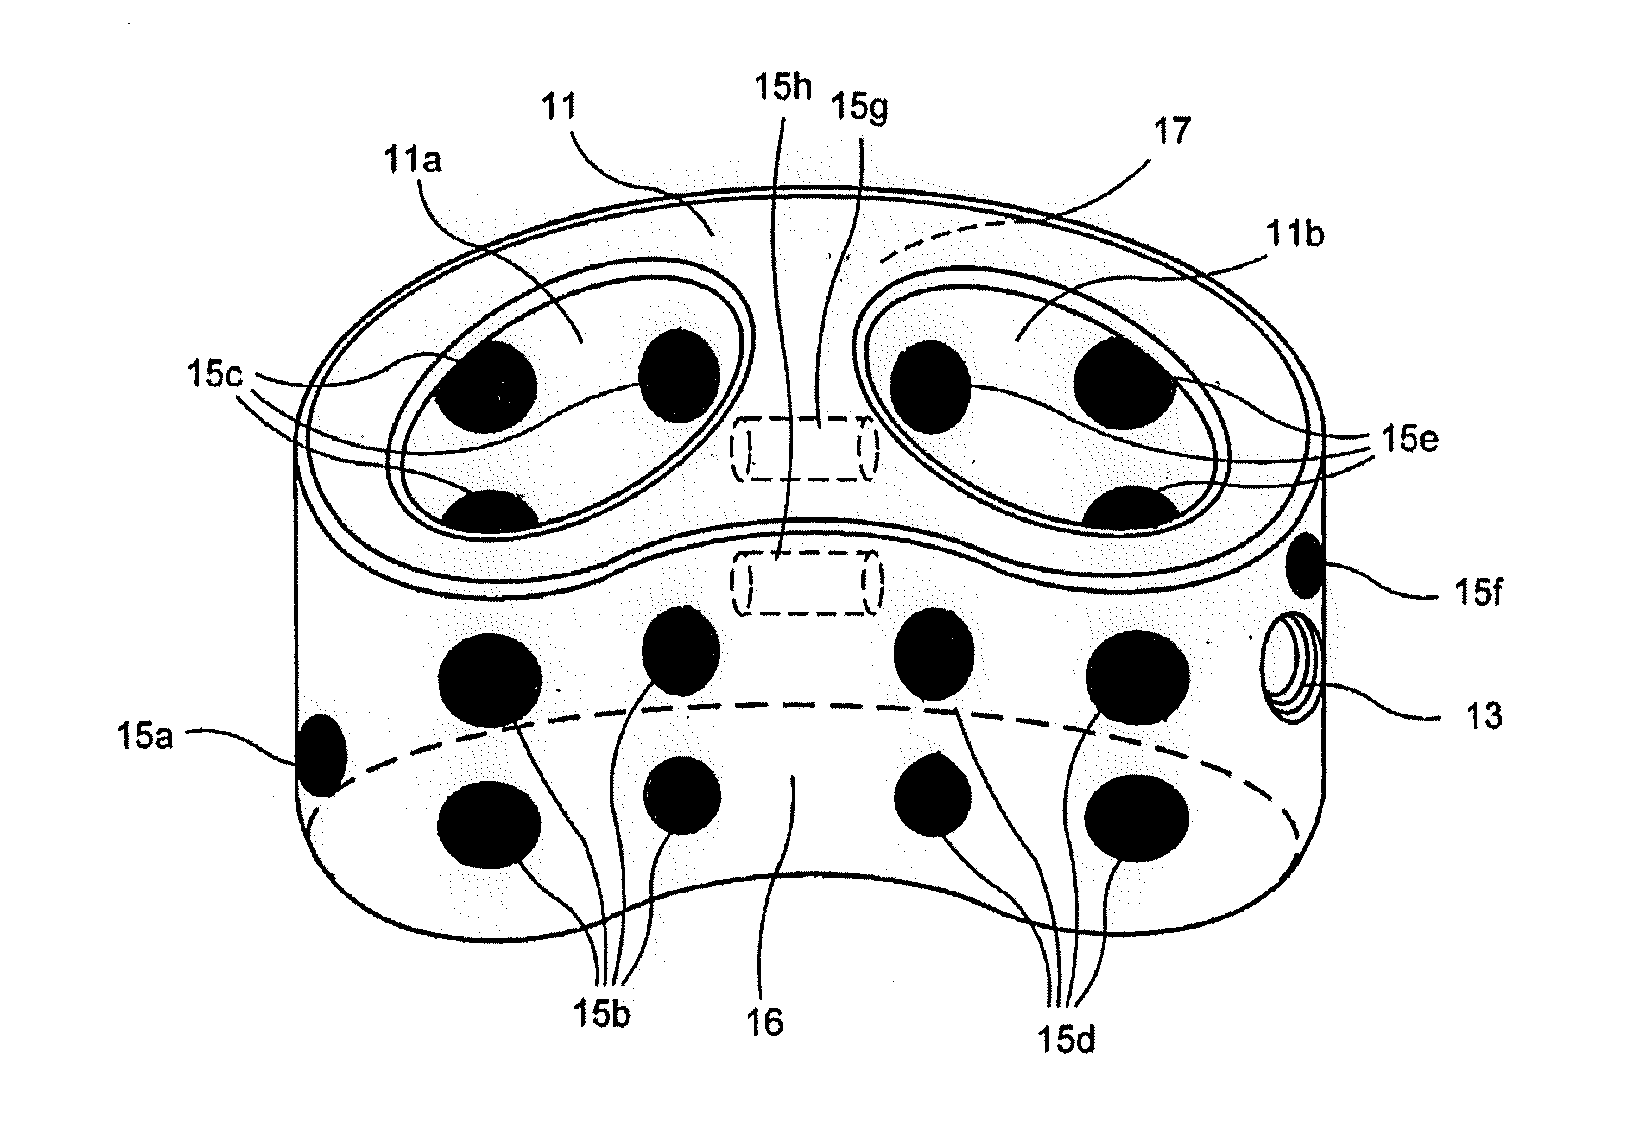 System and Method for Identification of Medical Device